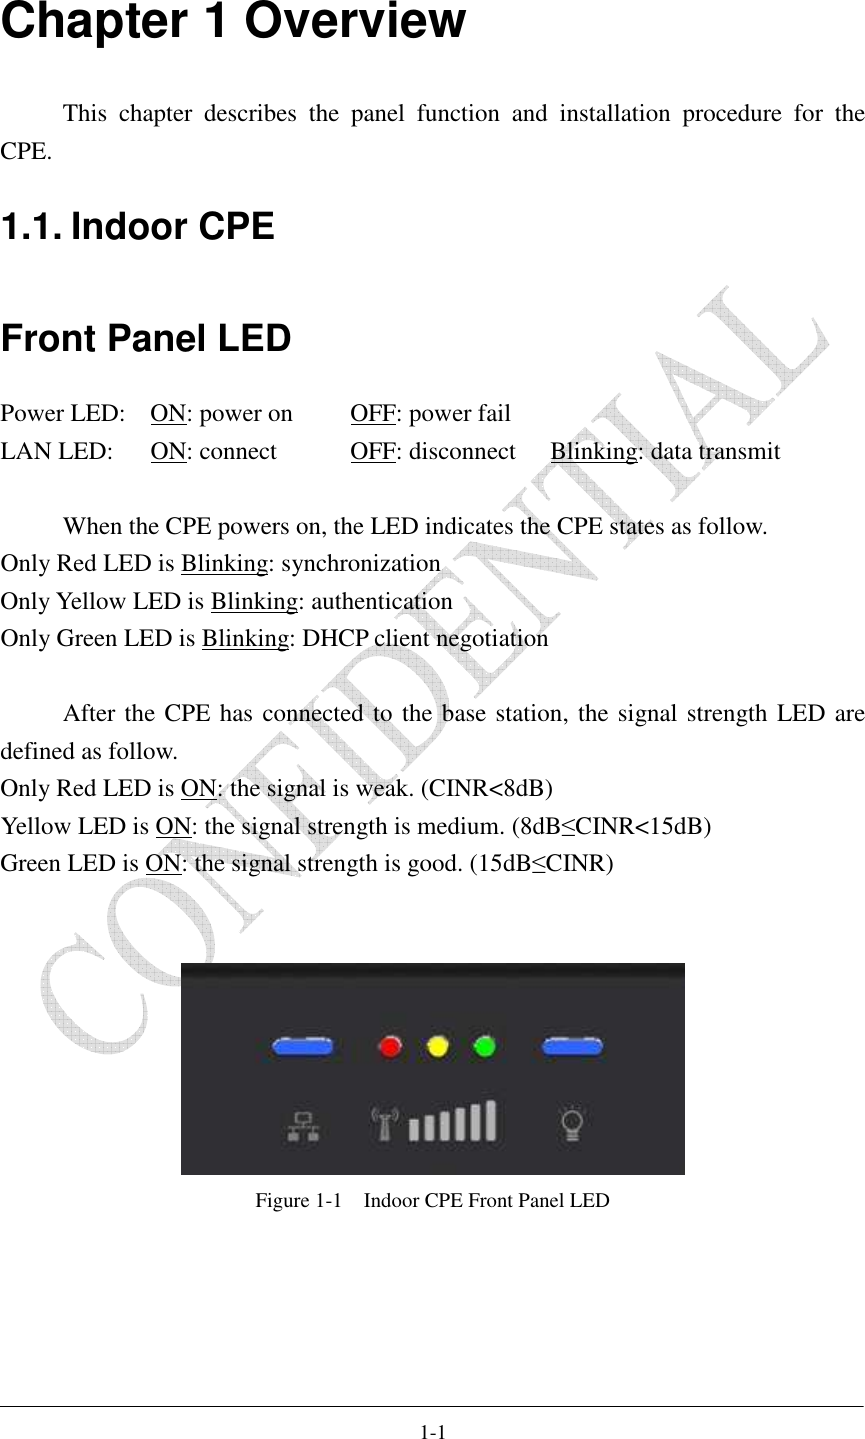    1-1 Chapter 1 Overview This  chapter  describes  the  panel  function  and  installation  procedure  for  the CPE. 1.1. Indoor CPE Front Panel LED Power LED:  ON: power on   OFF: power fail LAN LED:  ON: connect    OFF: disconnect  Blinking: data transmit  When the CPE powers on, the LED indicates the CPE states as follow. Only Red LED is Blinking: synchronization Only Yellow LED is Blinking: authentication Only Green LED is Blinking: DHCP client negotiation  After the CPE has connected to the base station, the signal strength LED are defined as follow. Only Red LED is ON: the signal is weak. (CINR&lt;8dB) Yellow LED is ON: the signal strength is medium. (8dB≤CINR&lt;15dB) Green LED is ON: the signal strength is good. (15dB≤CINR)    Figure 1-1    Indoor CPE Front Panel LED  